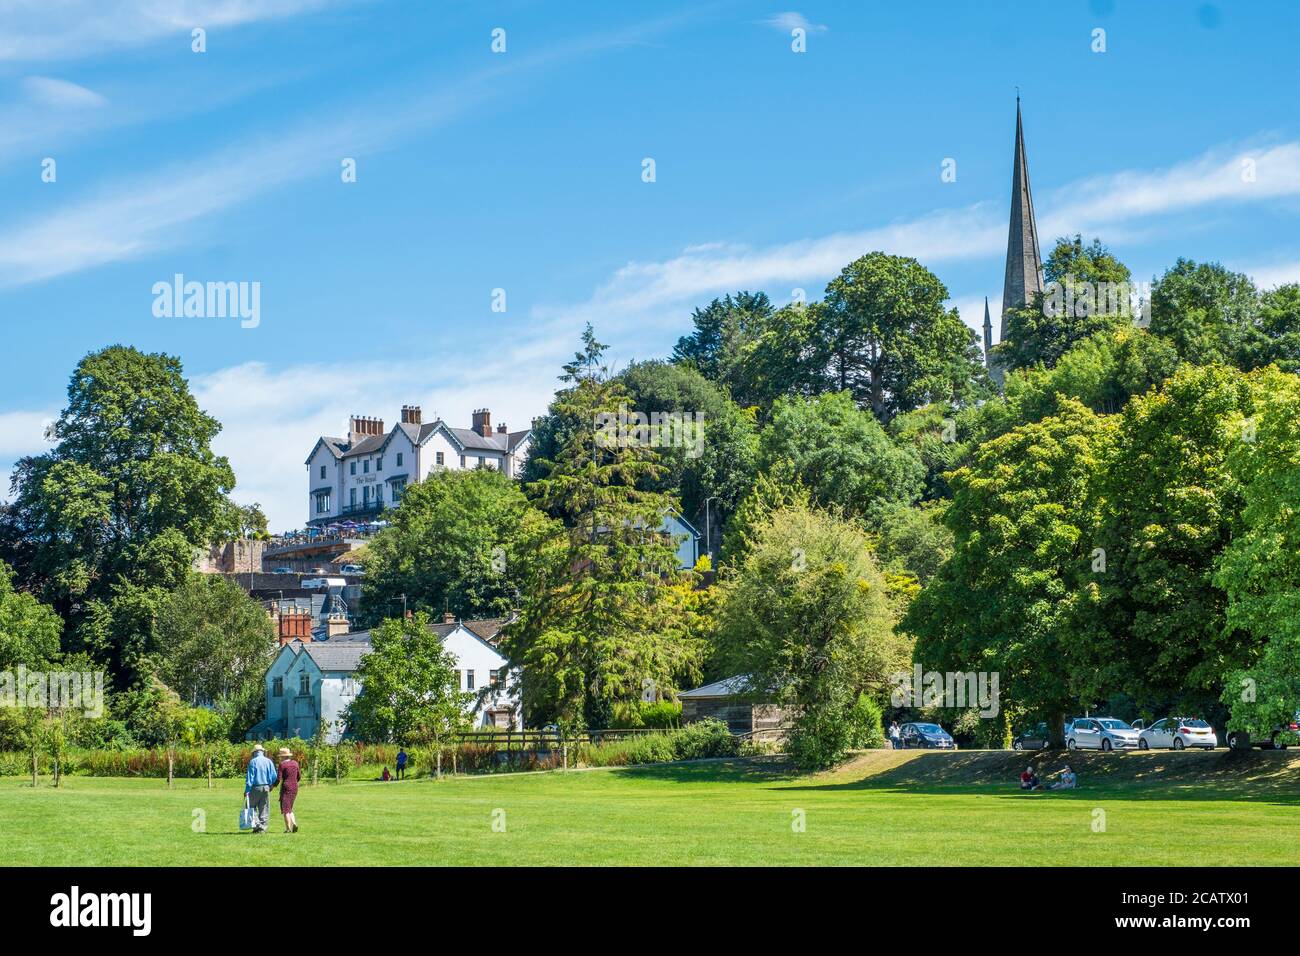 View of Ross on Wye from the riverside gardens. Stock Photo